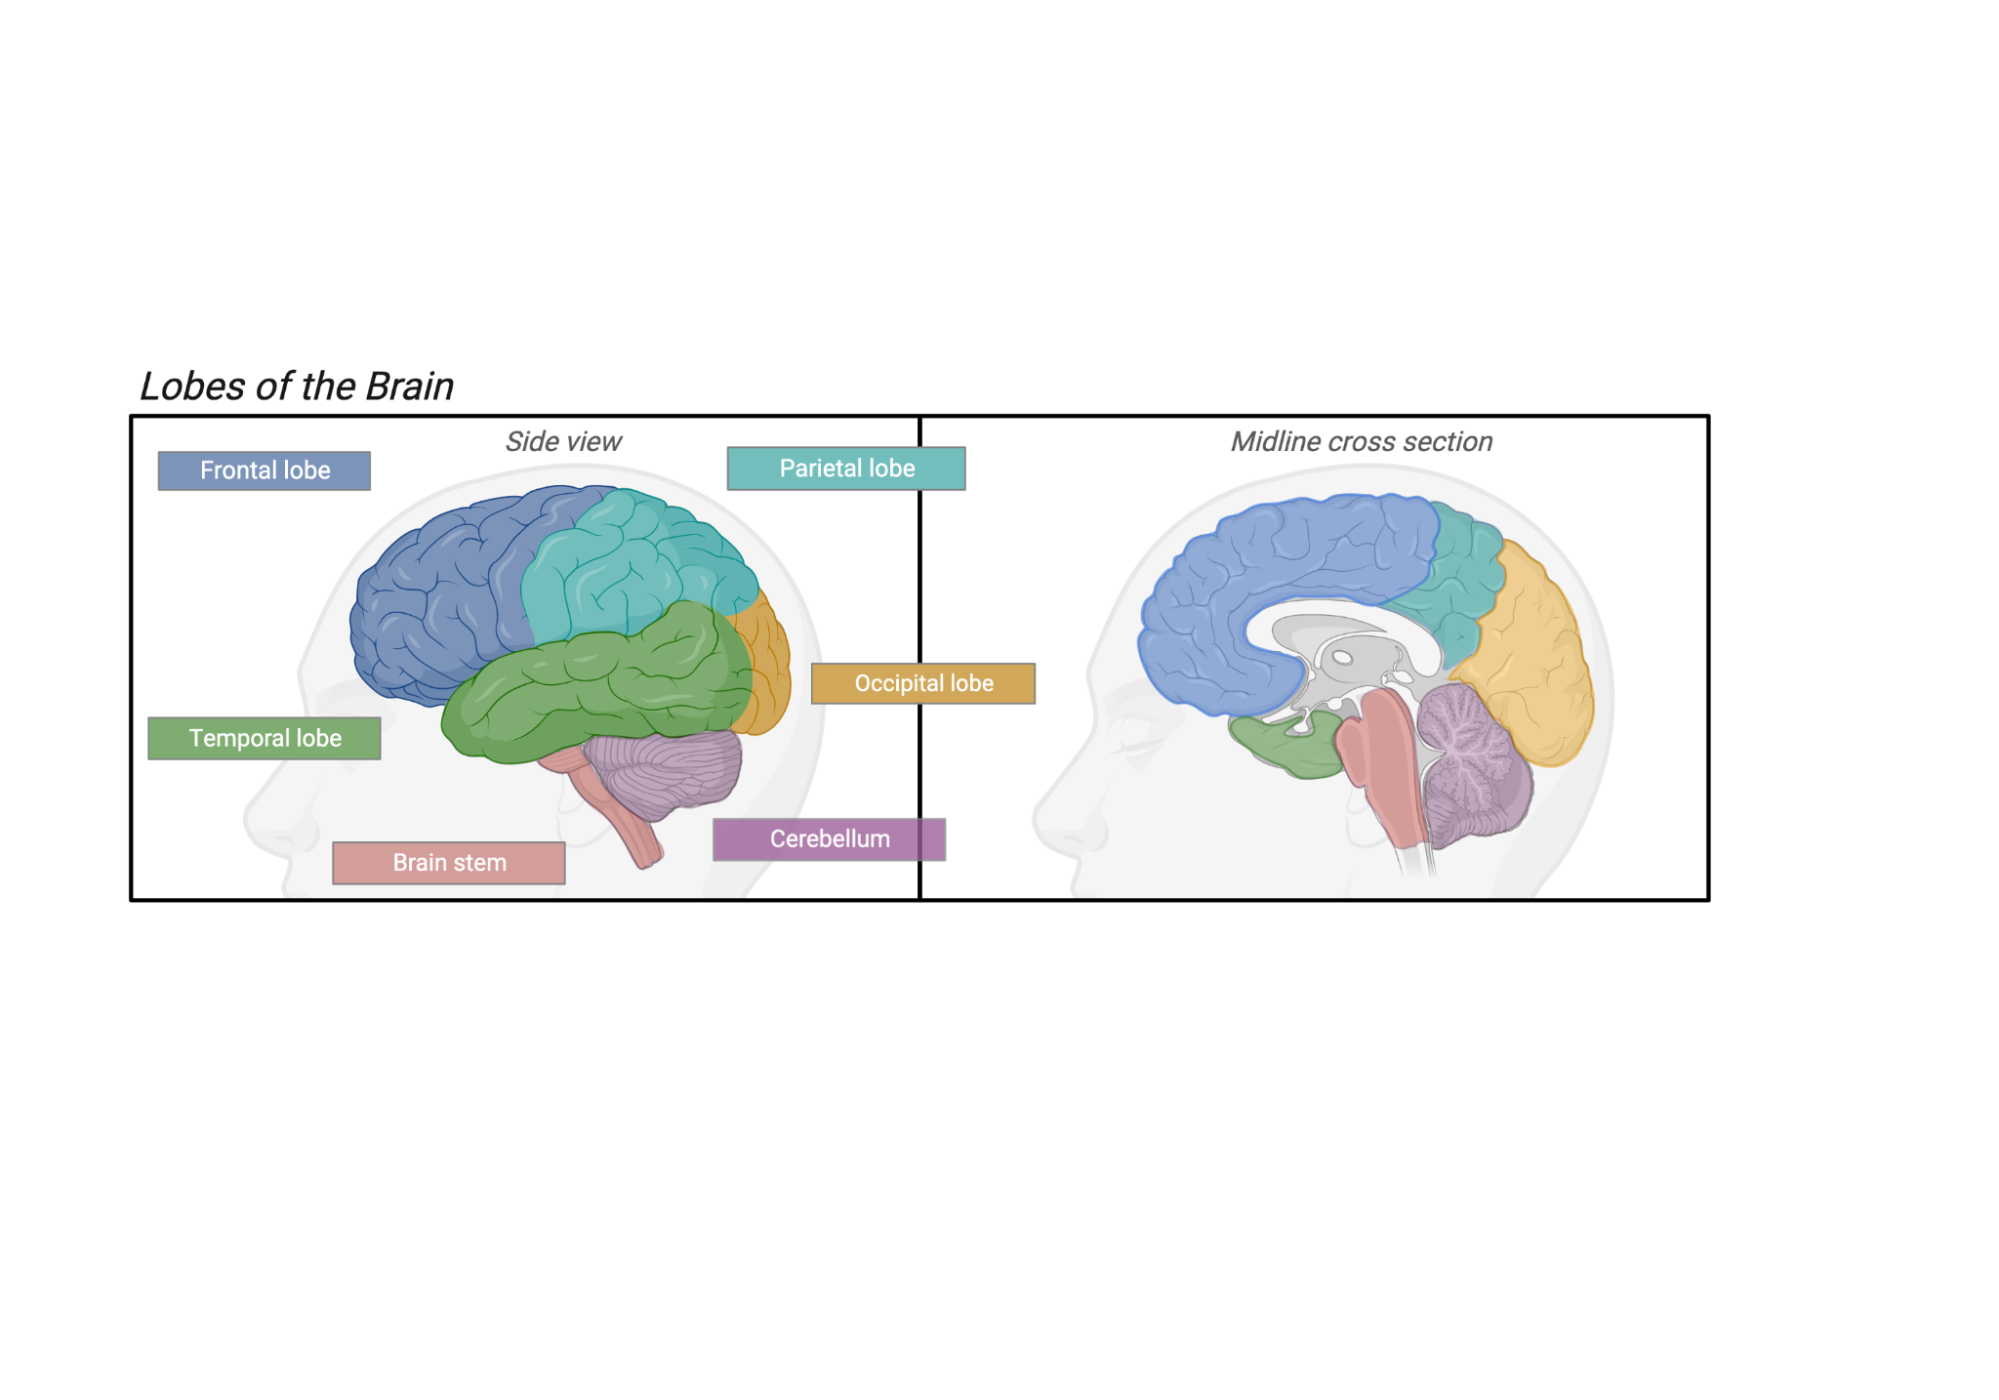 The left half of the image shows a diagram of a side or lateral view of the human brain, with the frontal, parietal, temporal and occipital lobes labeled, as well as cerebellum at the back of the brain and the spinal cord. The right half shows a cross section diagram through the midline, revealing another way to see these same regions.